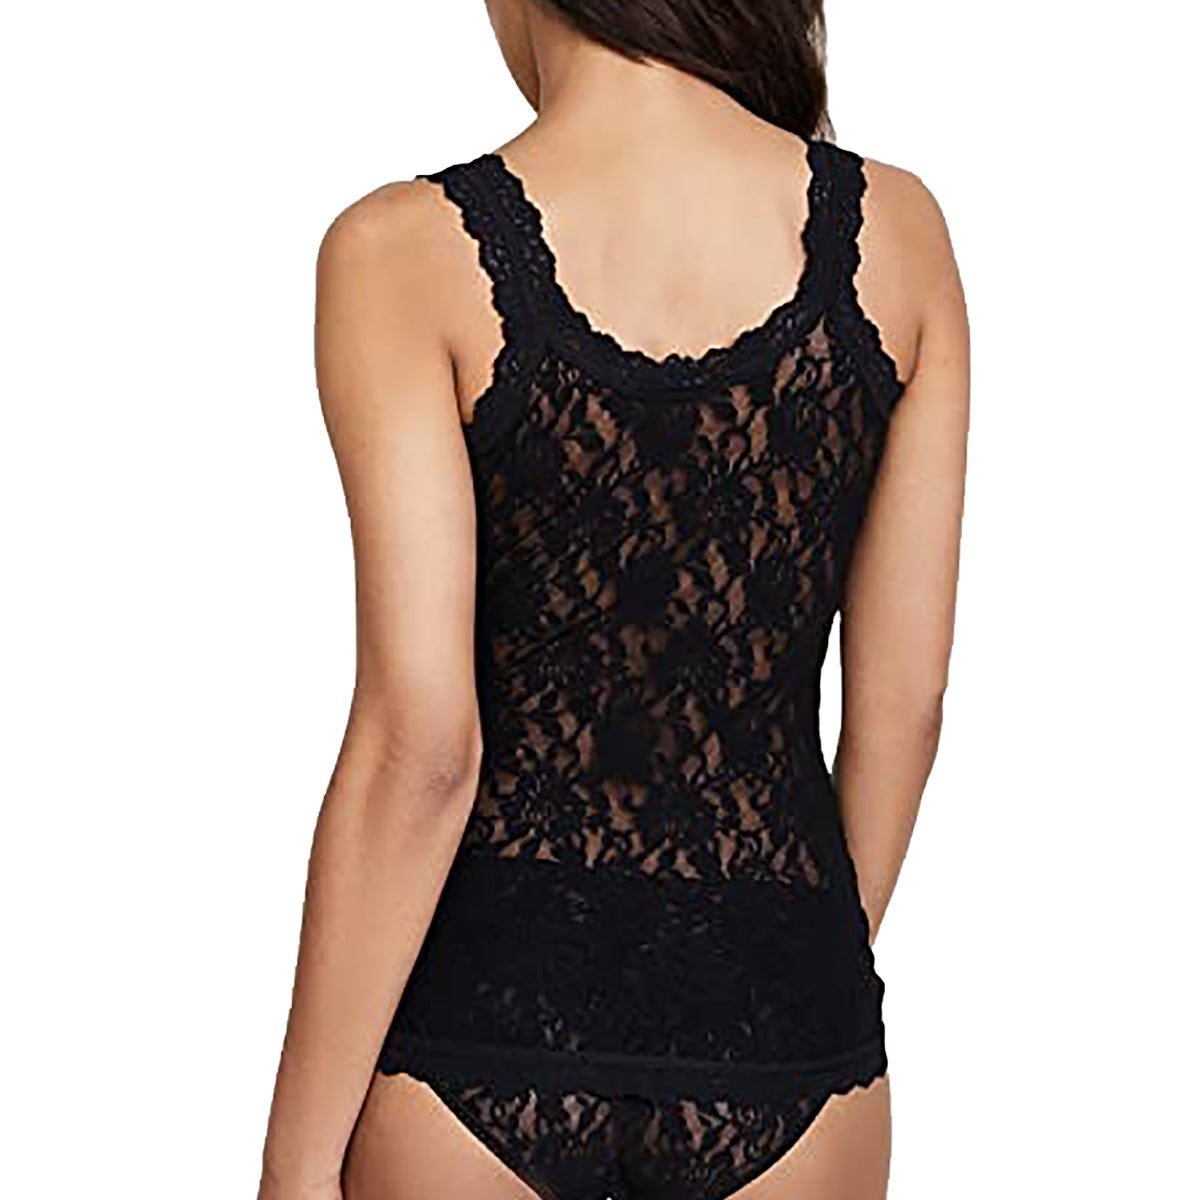 Hanky Panky Signature Lace Classic Cami - Black, Chai, White – Lily Pad  Lingerie